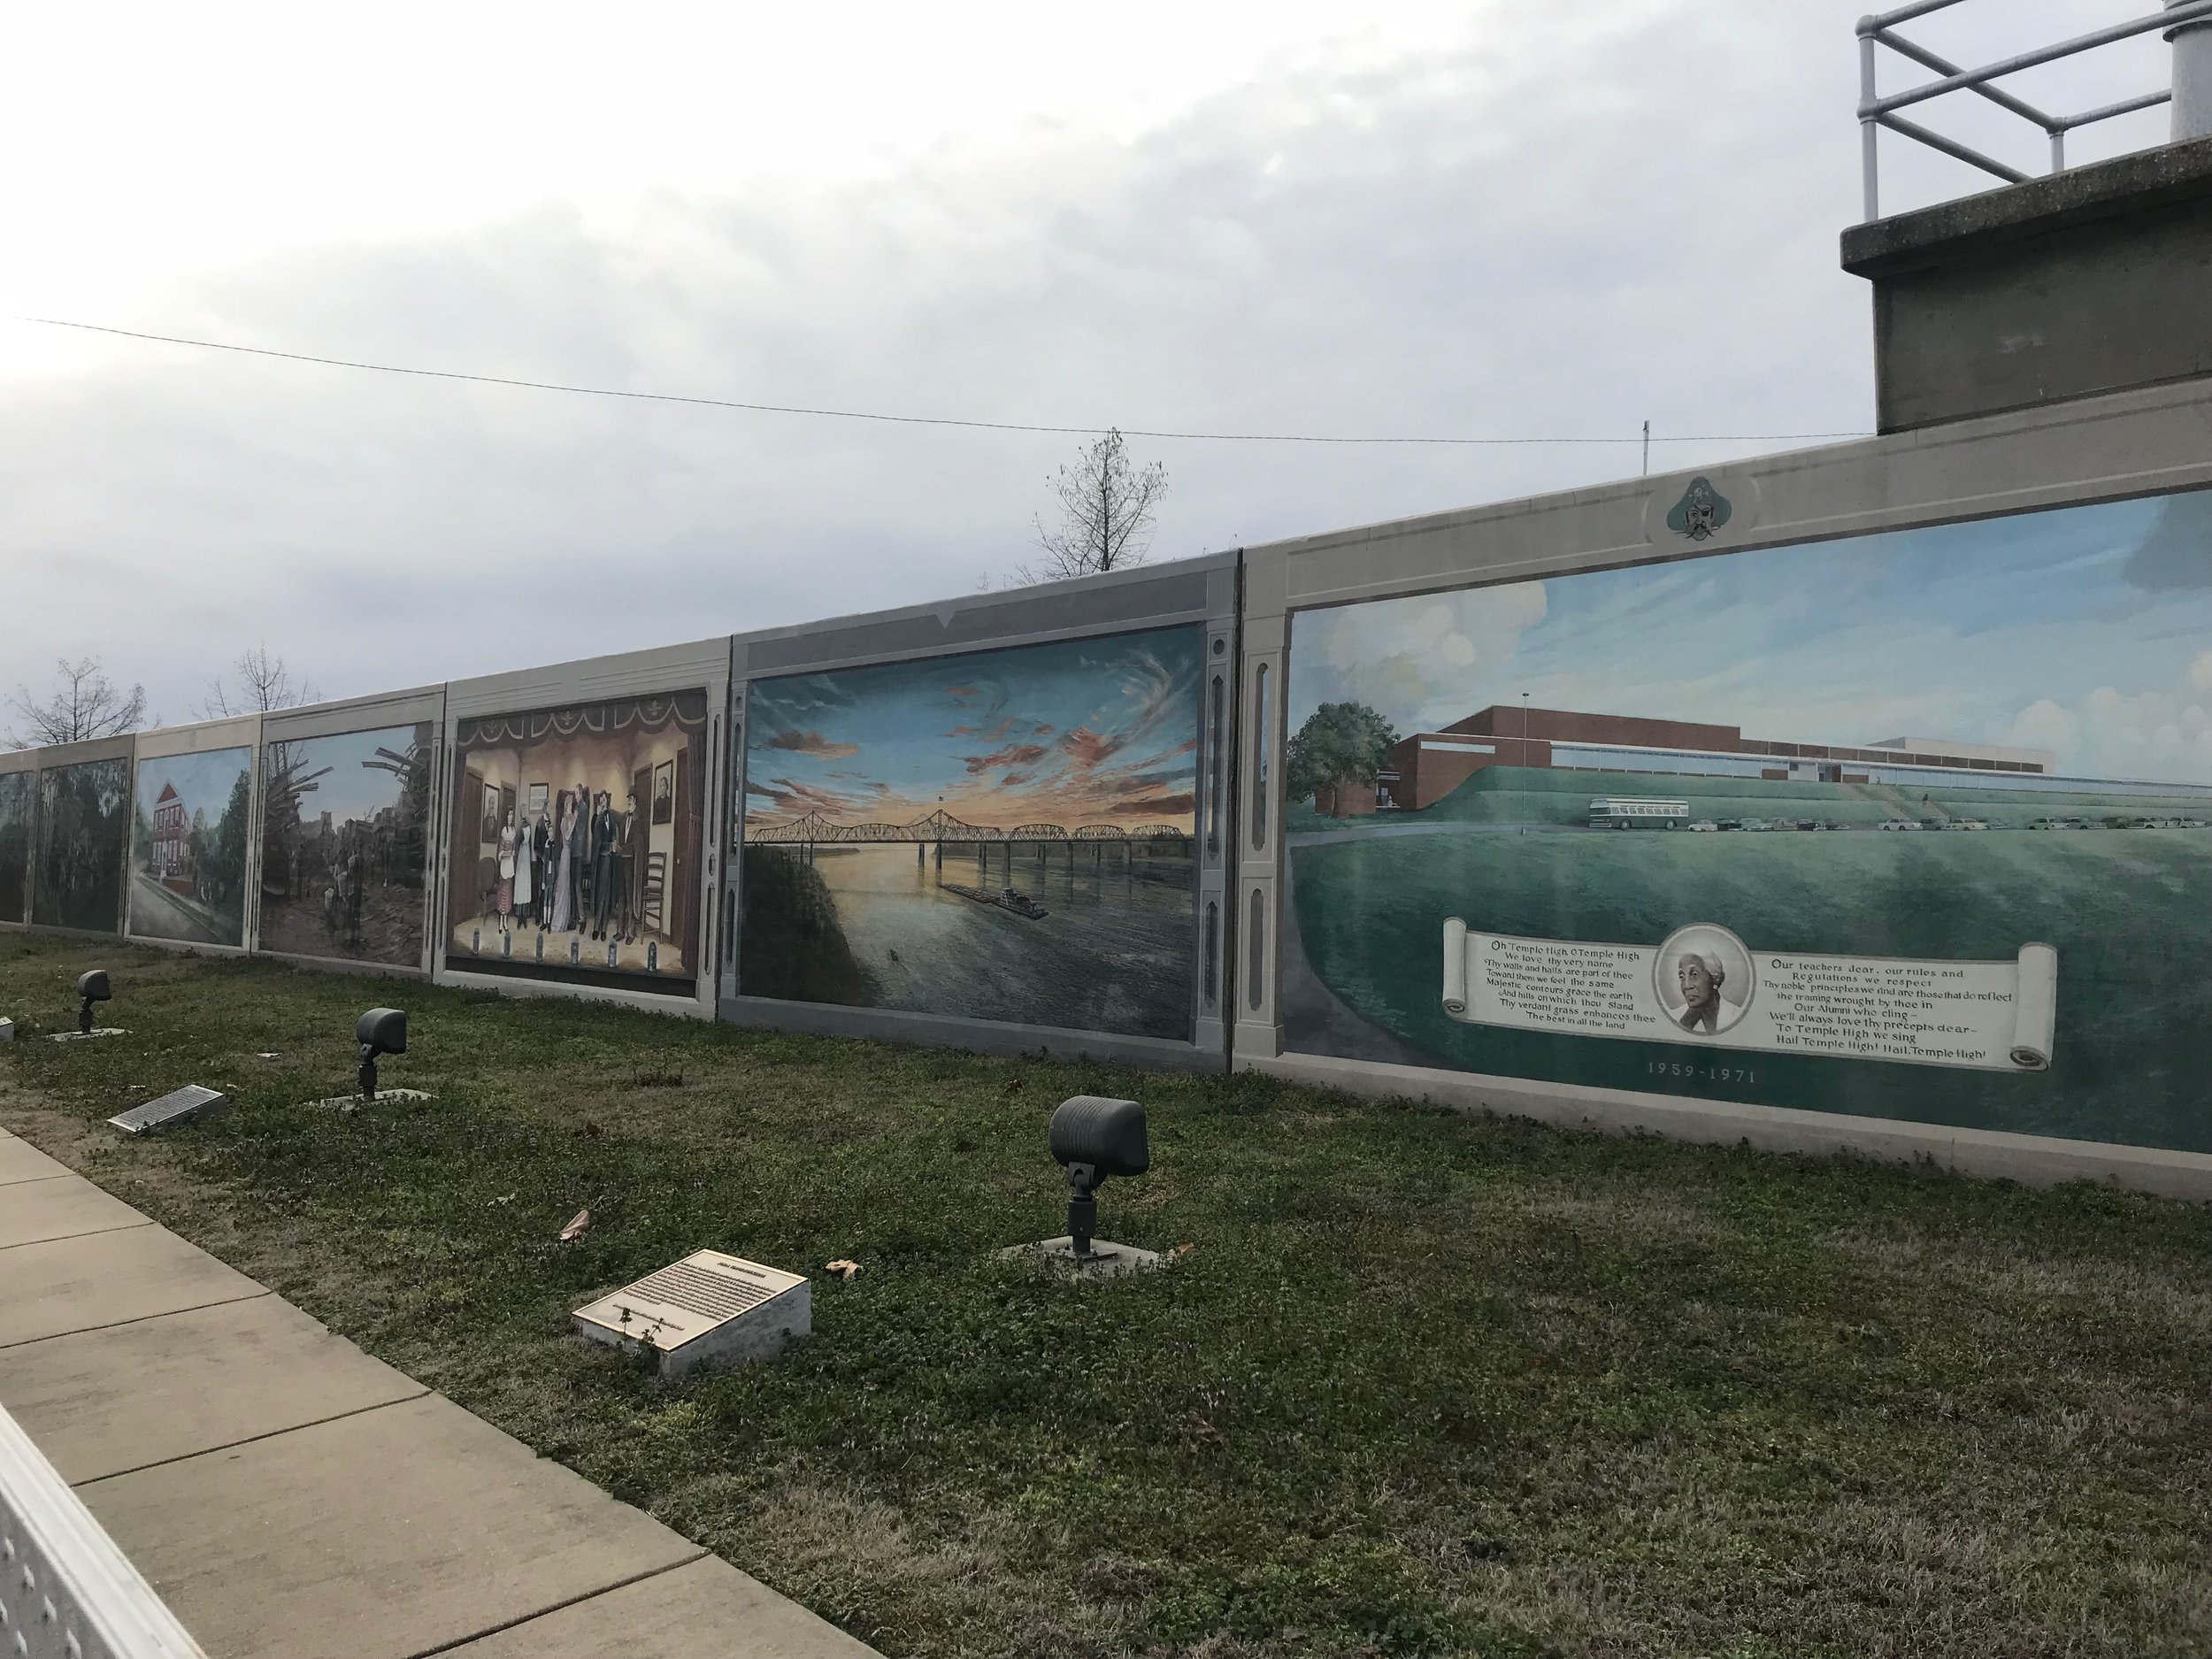   Murals painted on the levee separating downtown Vicksburg  from the Mississippi River celebrate its history, which is about all  Vicksburg has left to celebrate.  